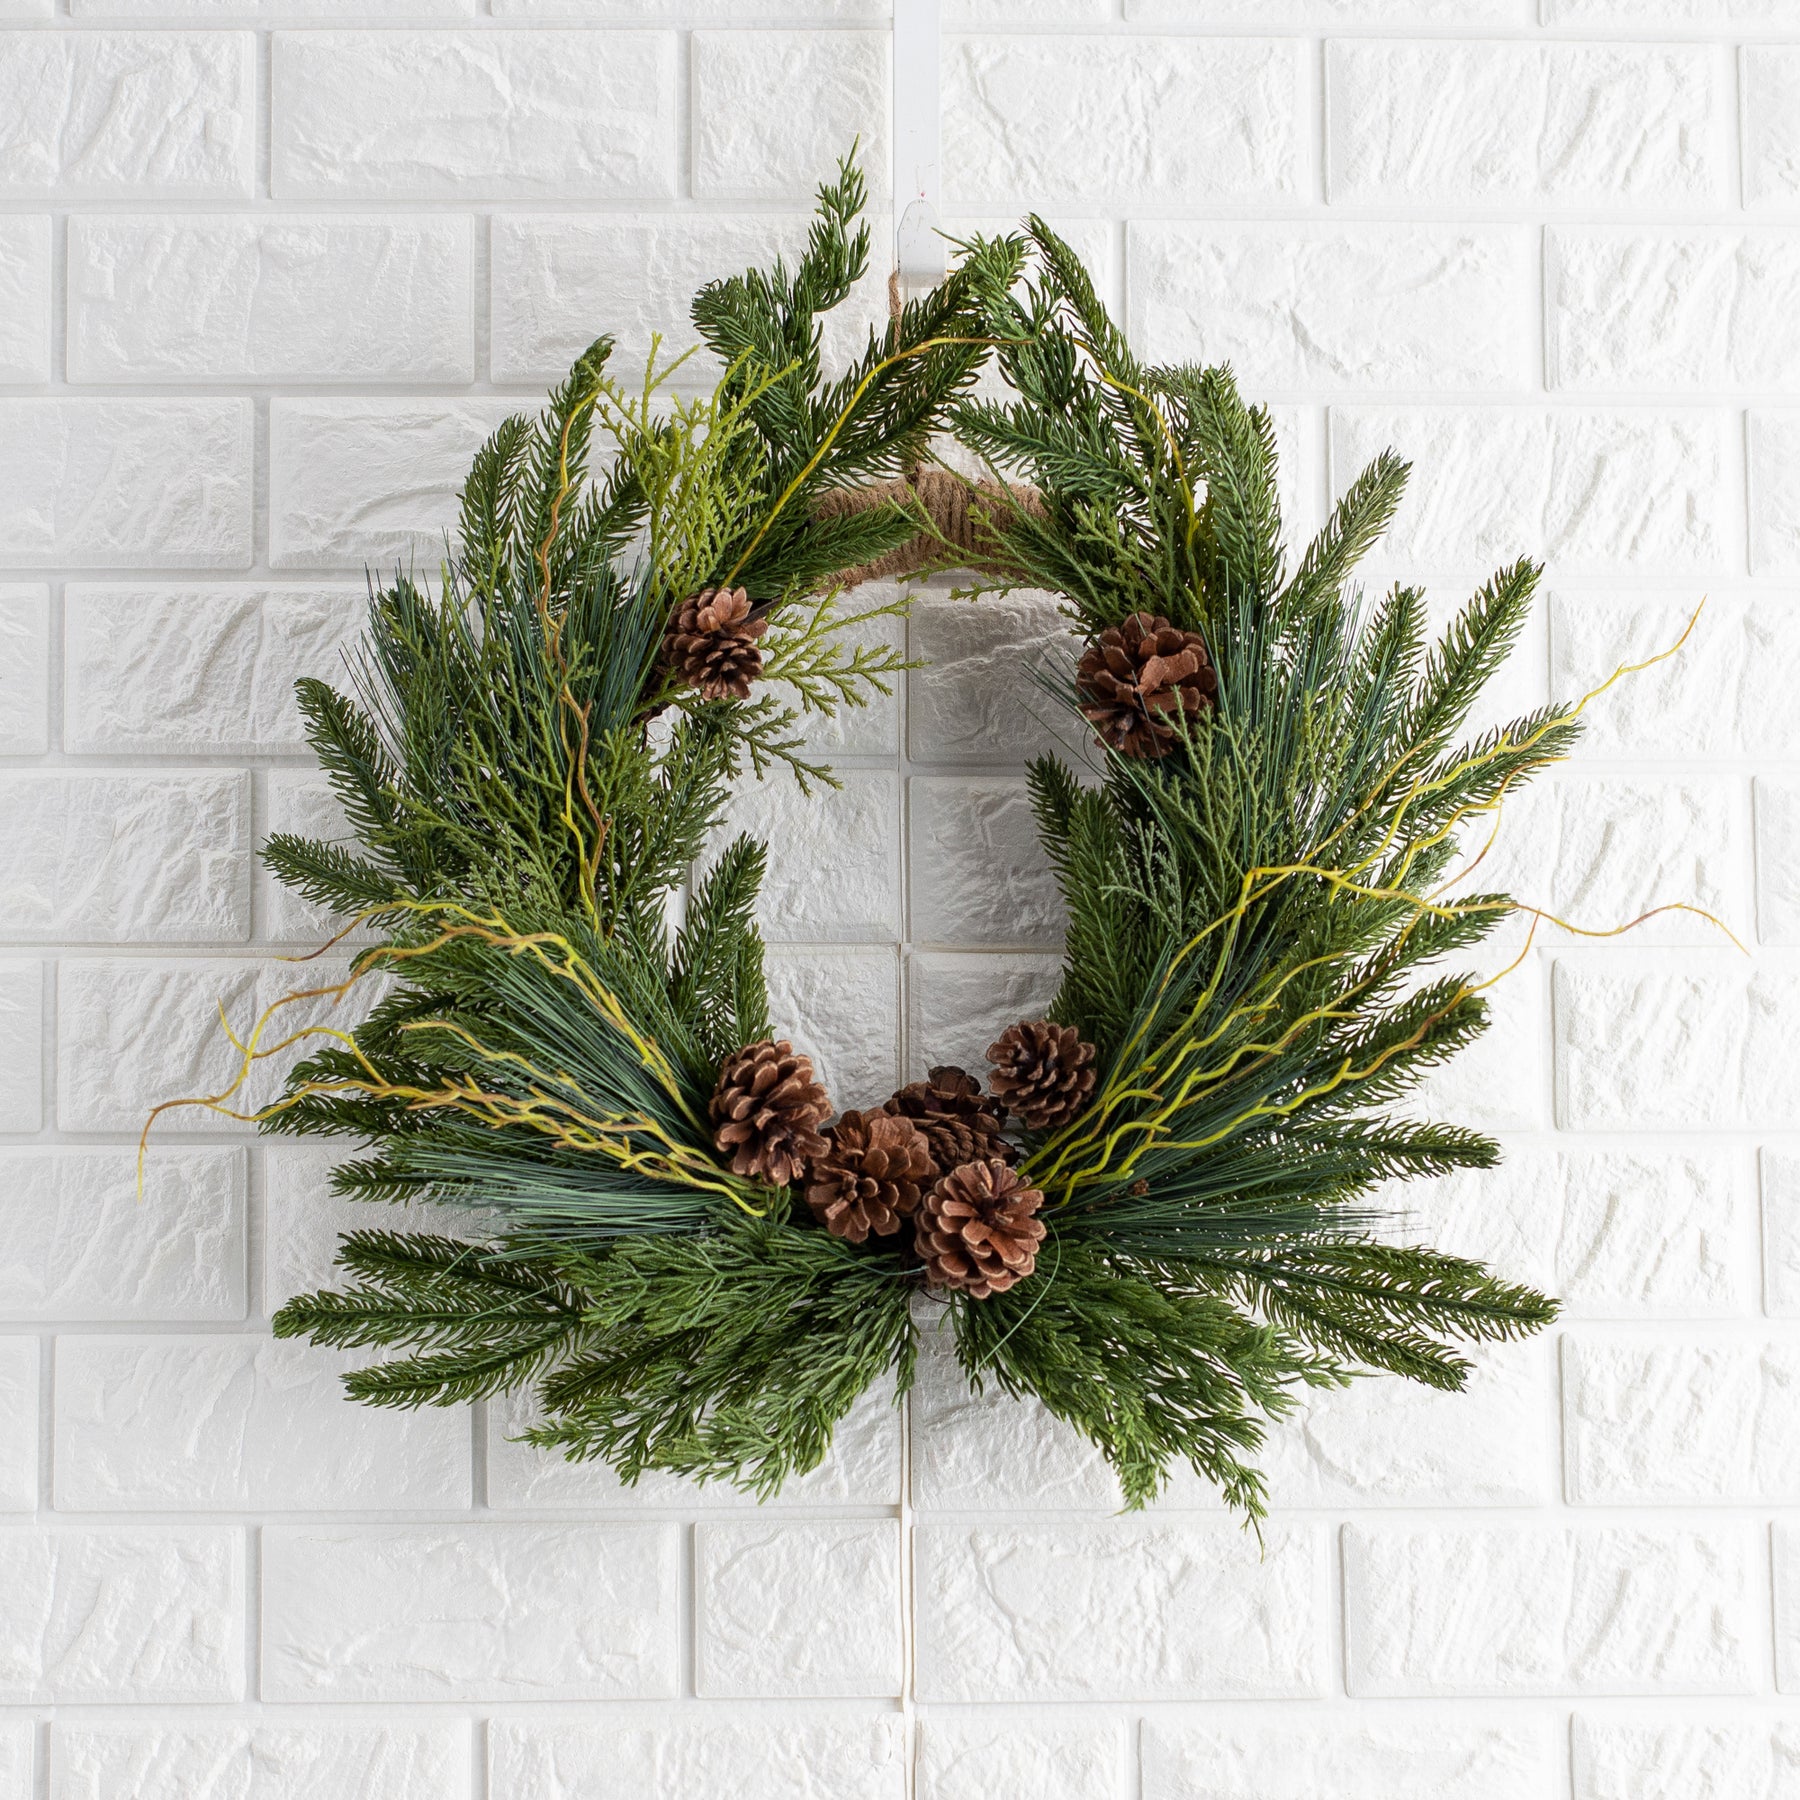 Evergreen Forest Mixed Greens & Pine Cone Holiday Winter Front Door Cr ...